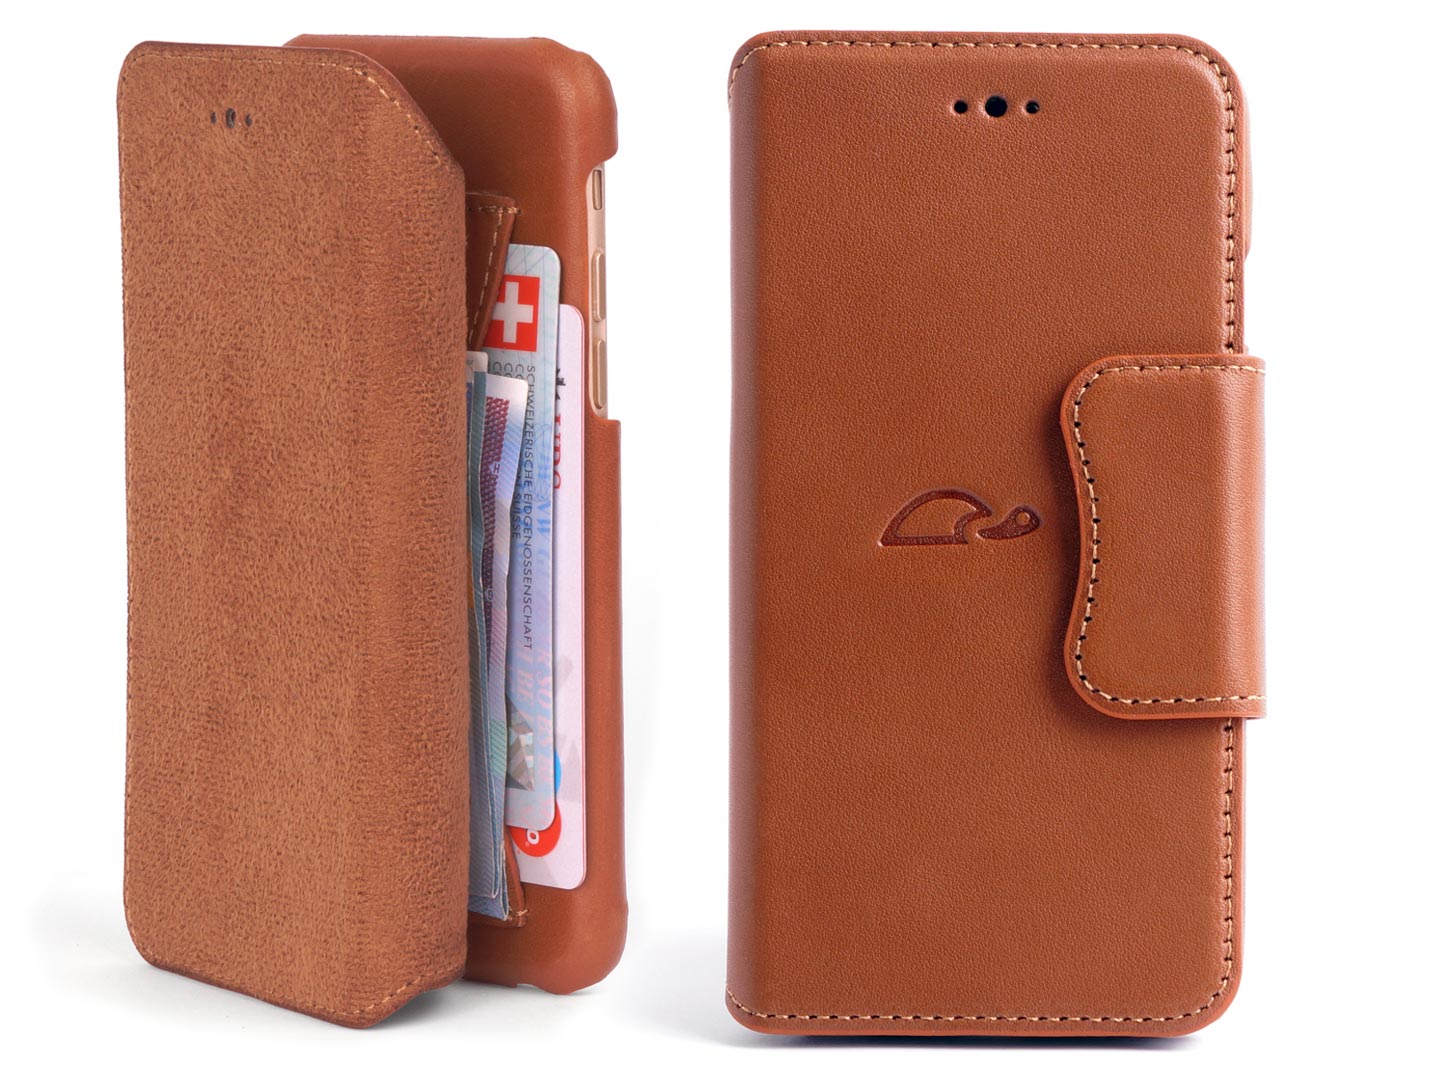 iPhone 6 Leather Wallet Case - With Pocket and Stand function Carapaz